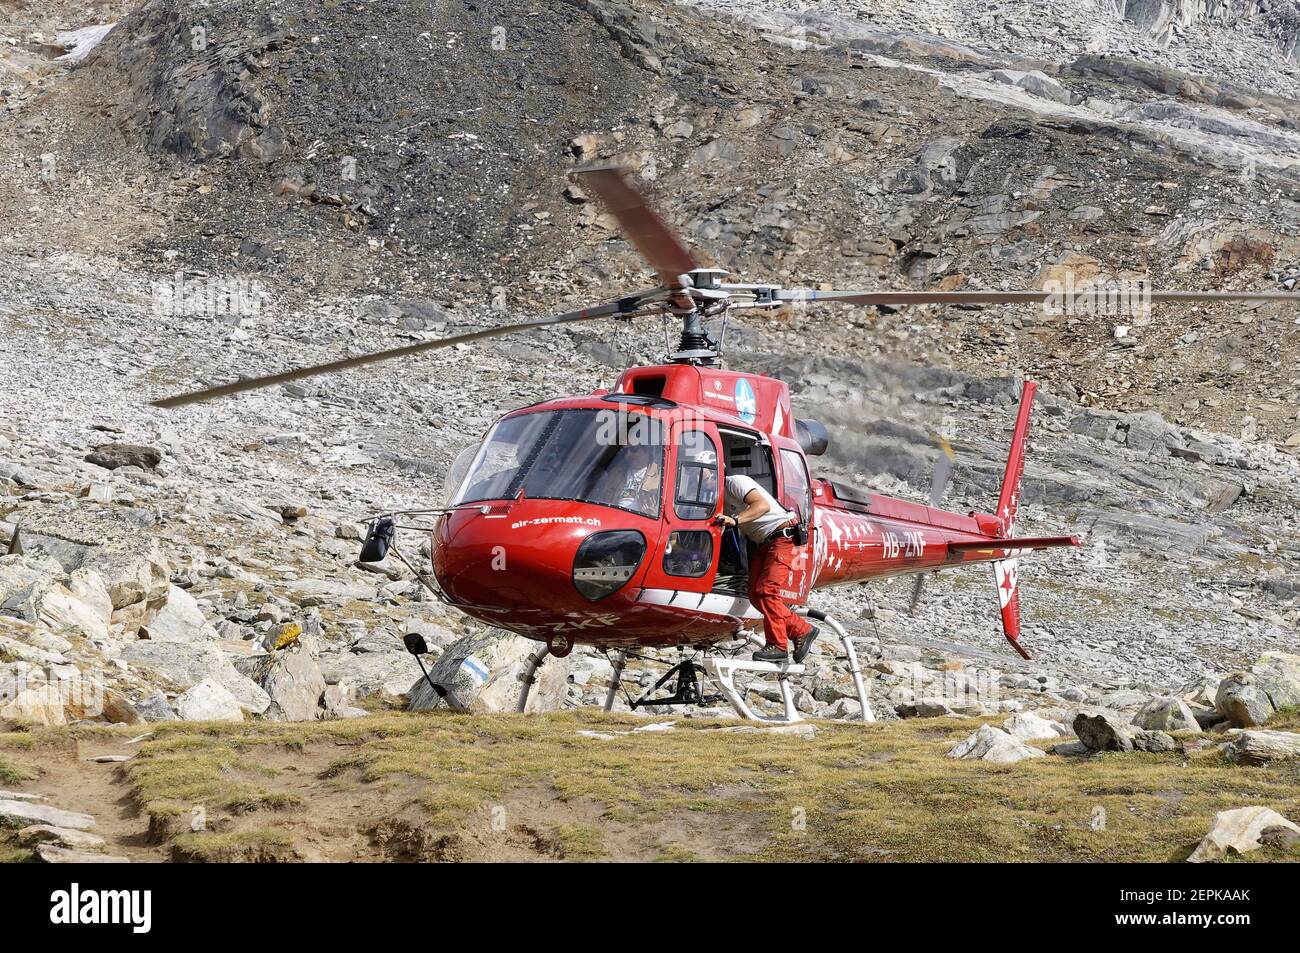 A red air rescue helicopter in the Swiss Alps, Switzerland Stock Photo